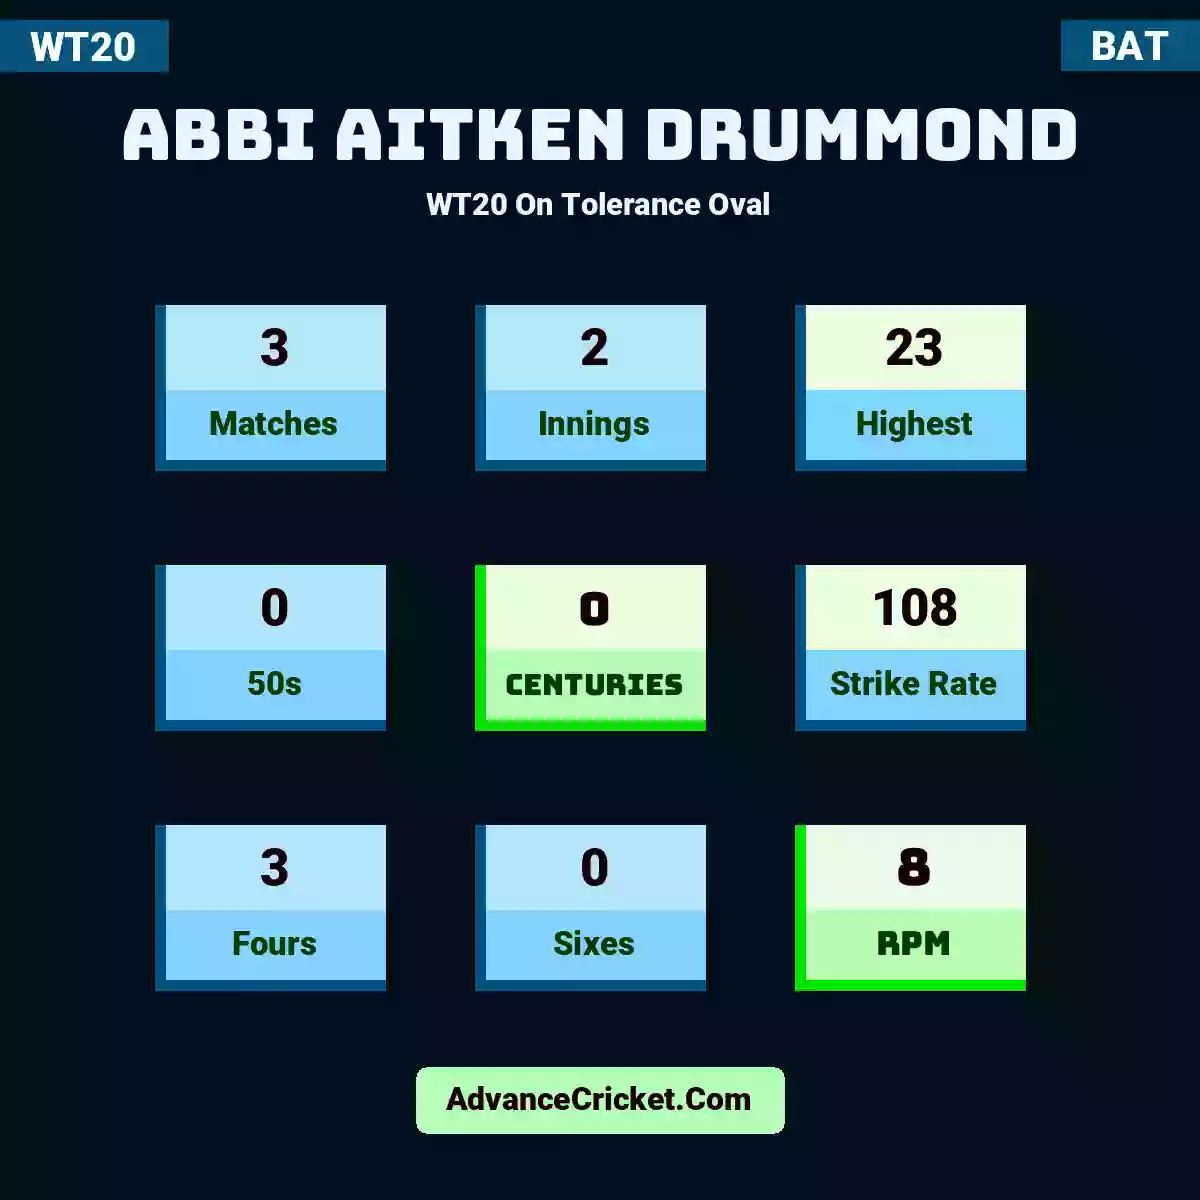 Abbi Aitken Drummond WT20  On Tolerance Oval, Abbi Aitken Drummond played 3 matches, scored 23 runs as highest, 0 half-centuries, and 0 centuries, with a strike rate of 108. A.Drummond hit 3 fours and 0 sixes, with an RPM of 8.